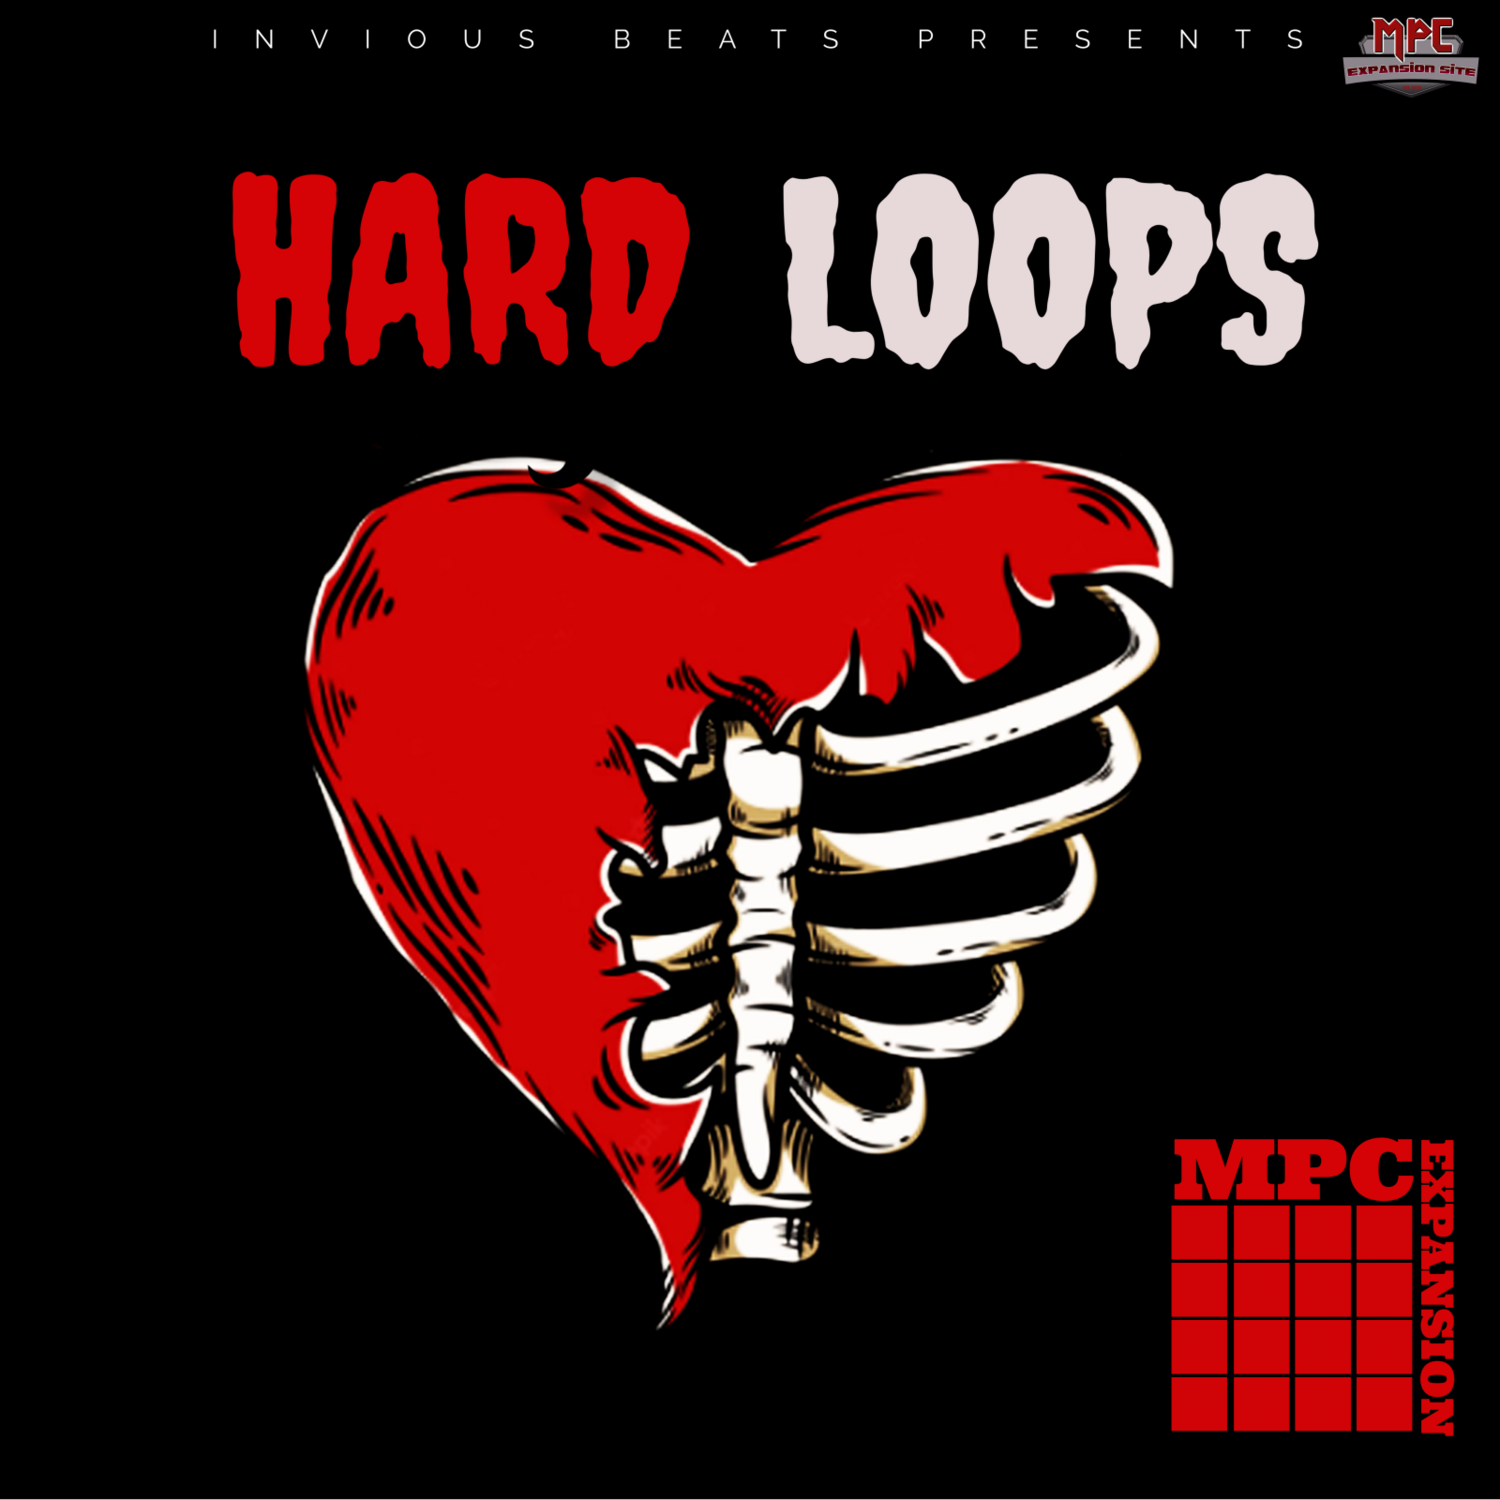 MPC EXPANSION 'HARD LOOPS' by INVIOUS